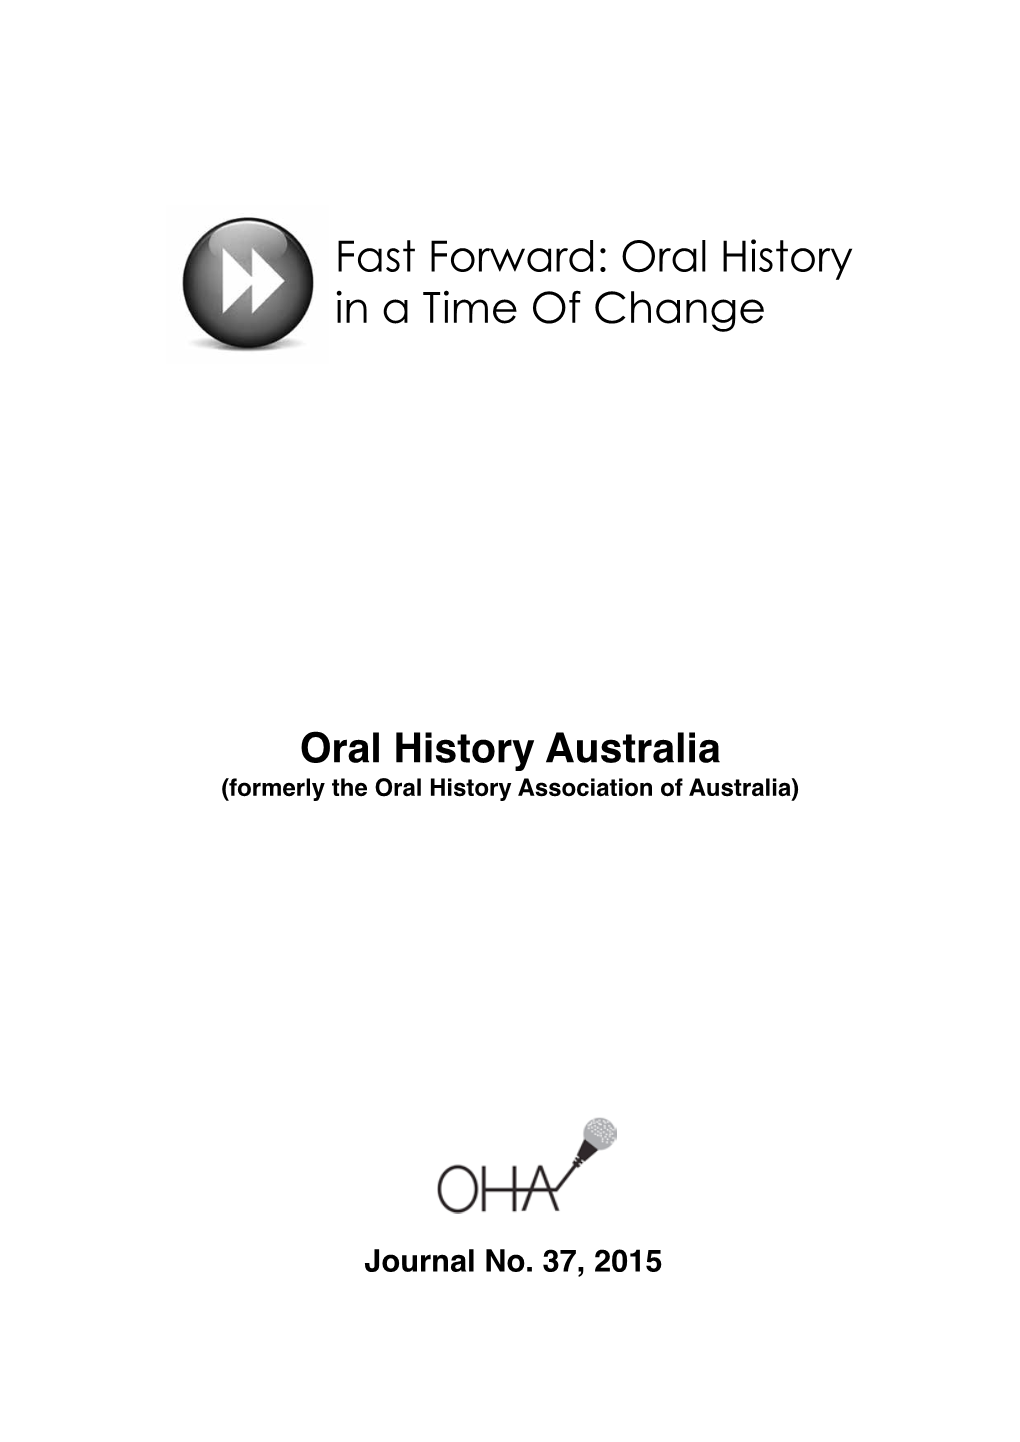 Fast Forward: Oral History in a Time of Change